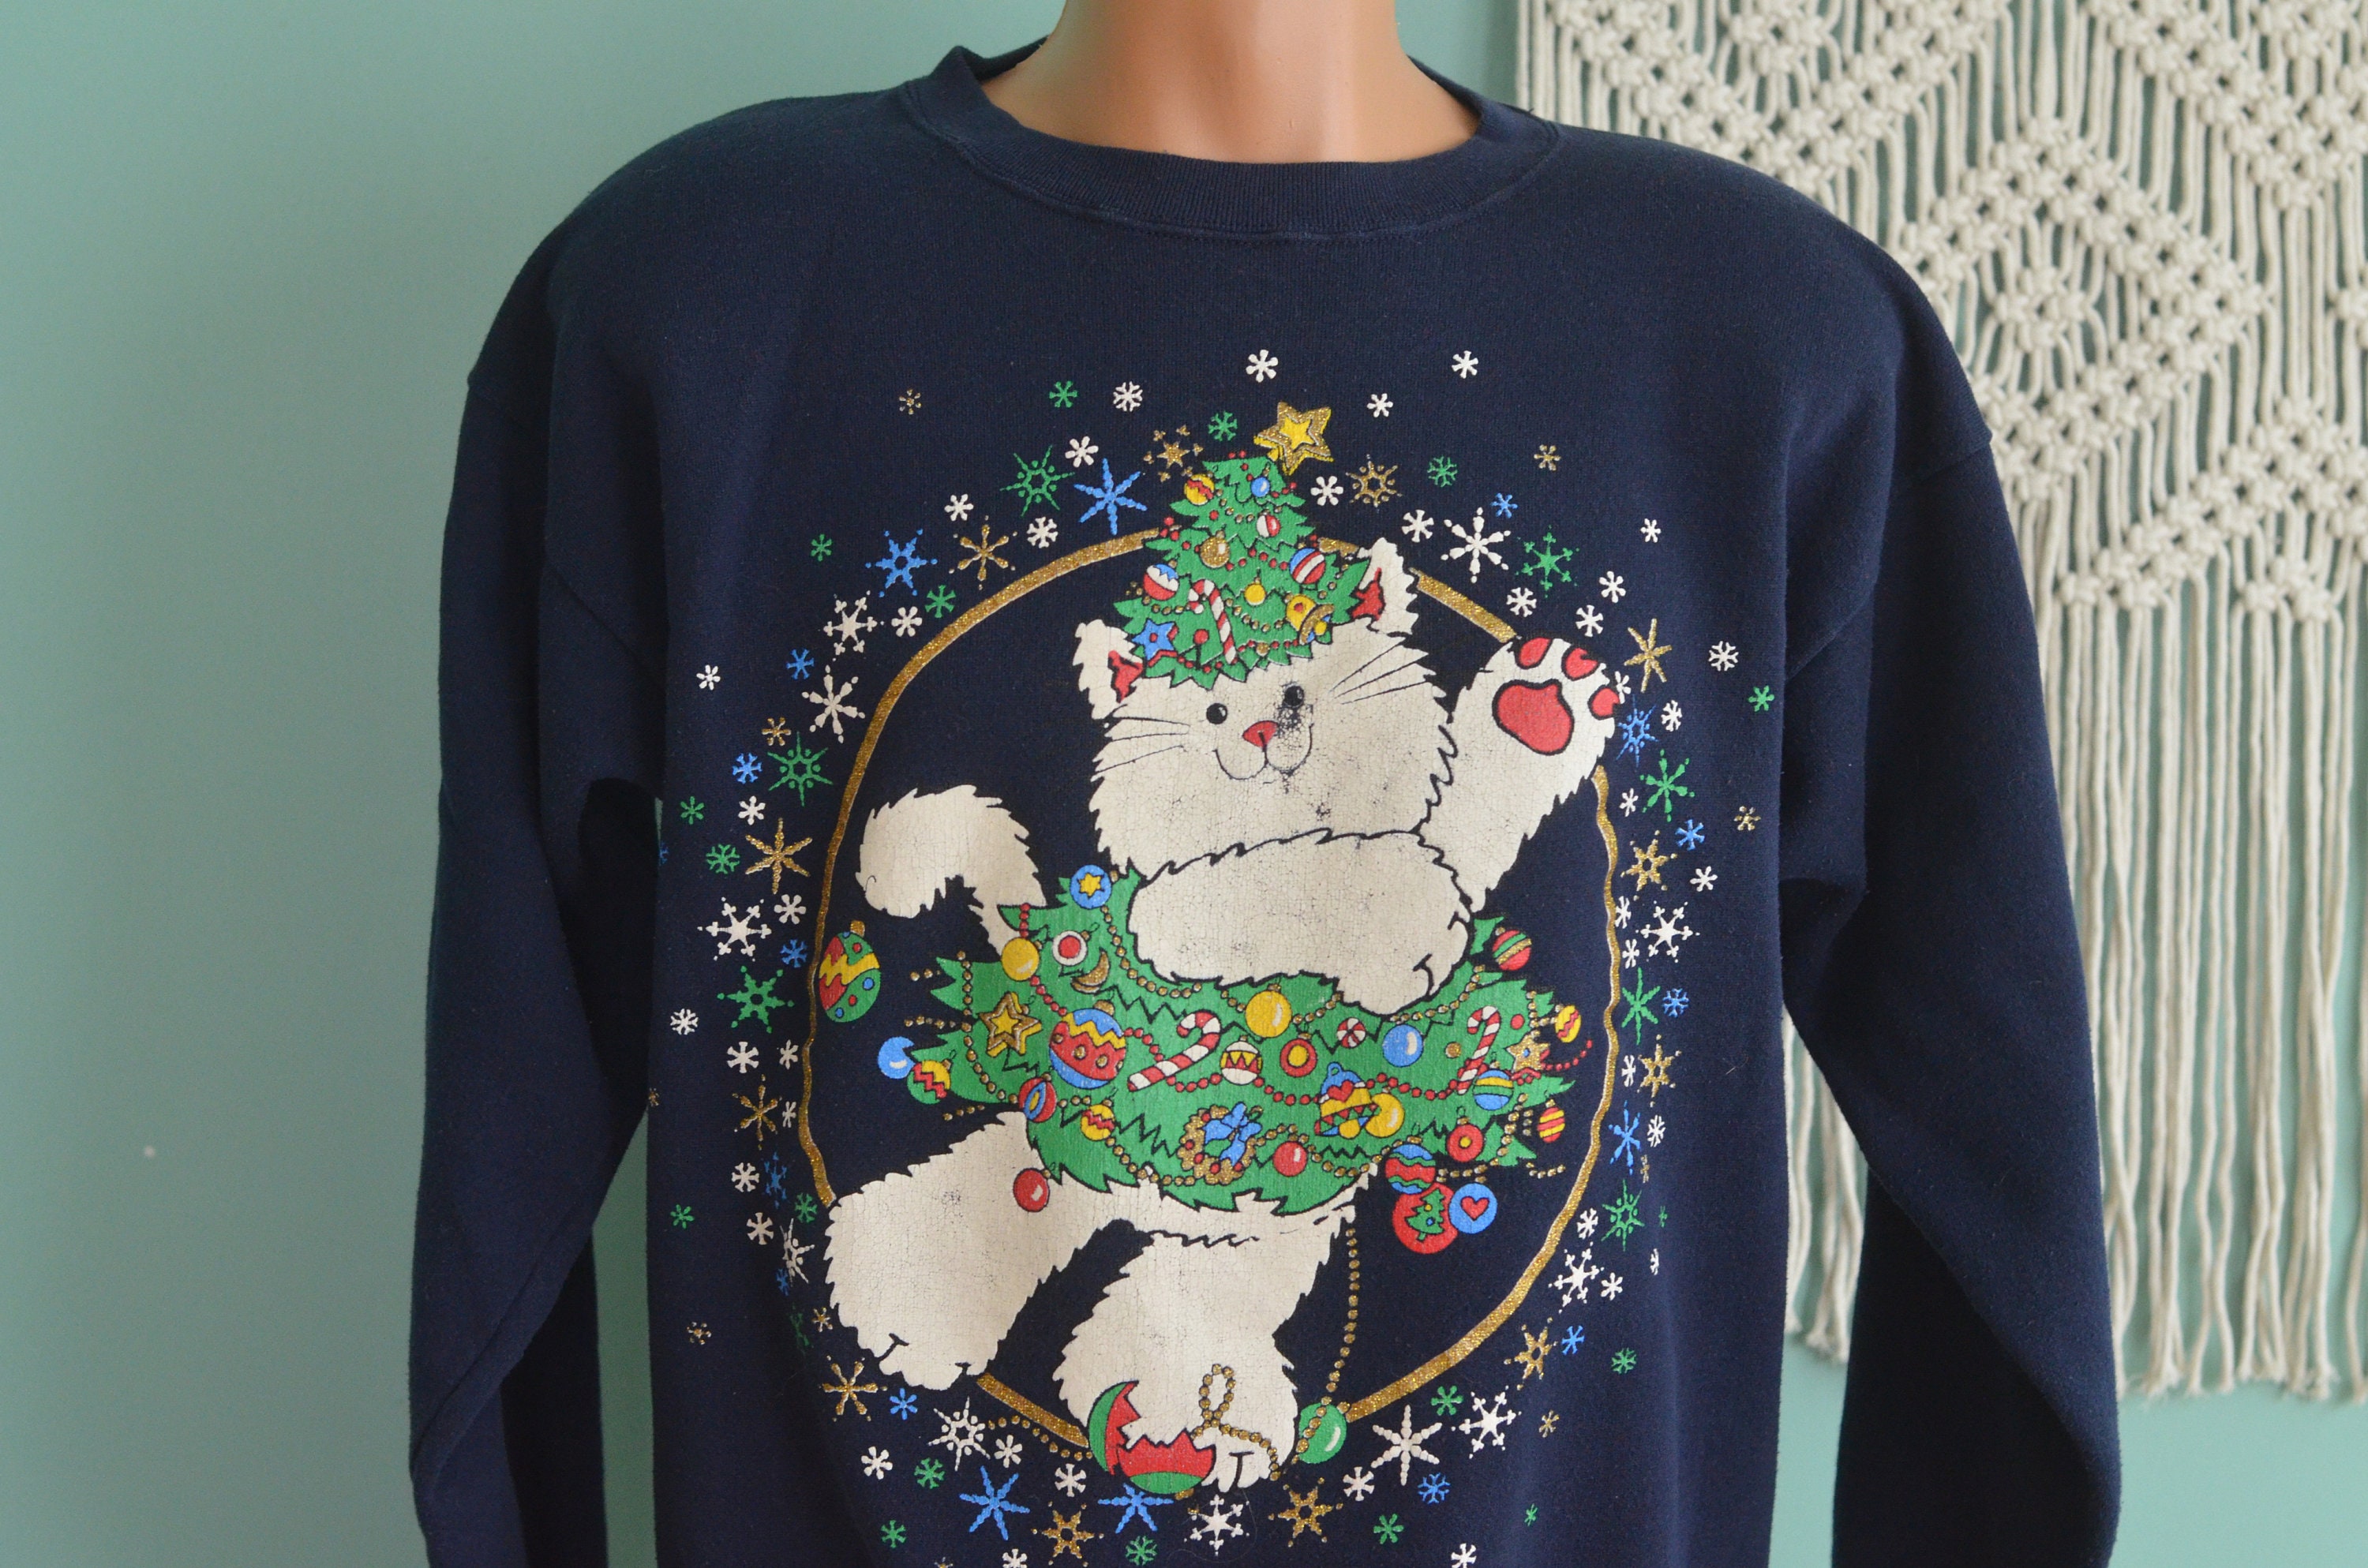 Vintage 80s Kitty Lover Cat Lady Tacky Ugly Christmas Sweater - The Ugly  Sweater Shop